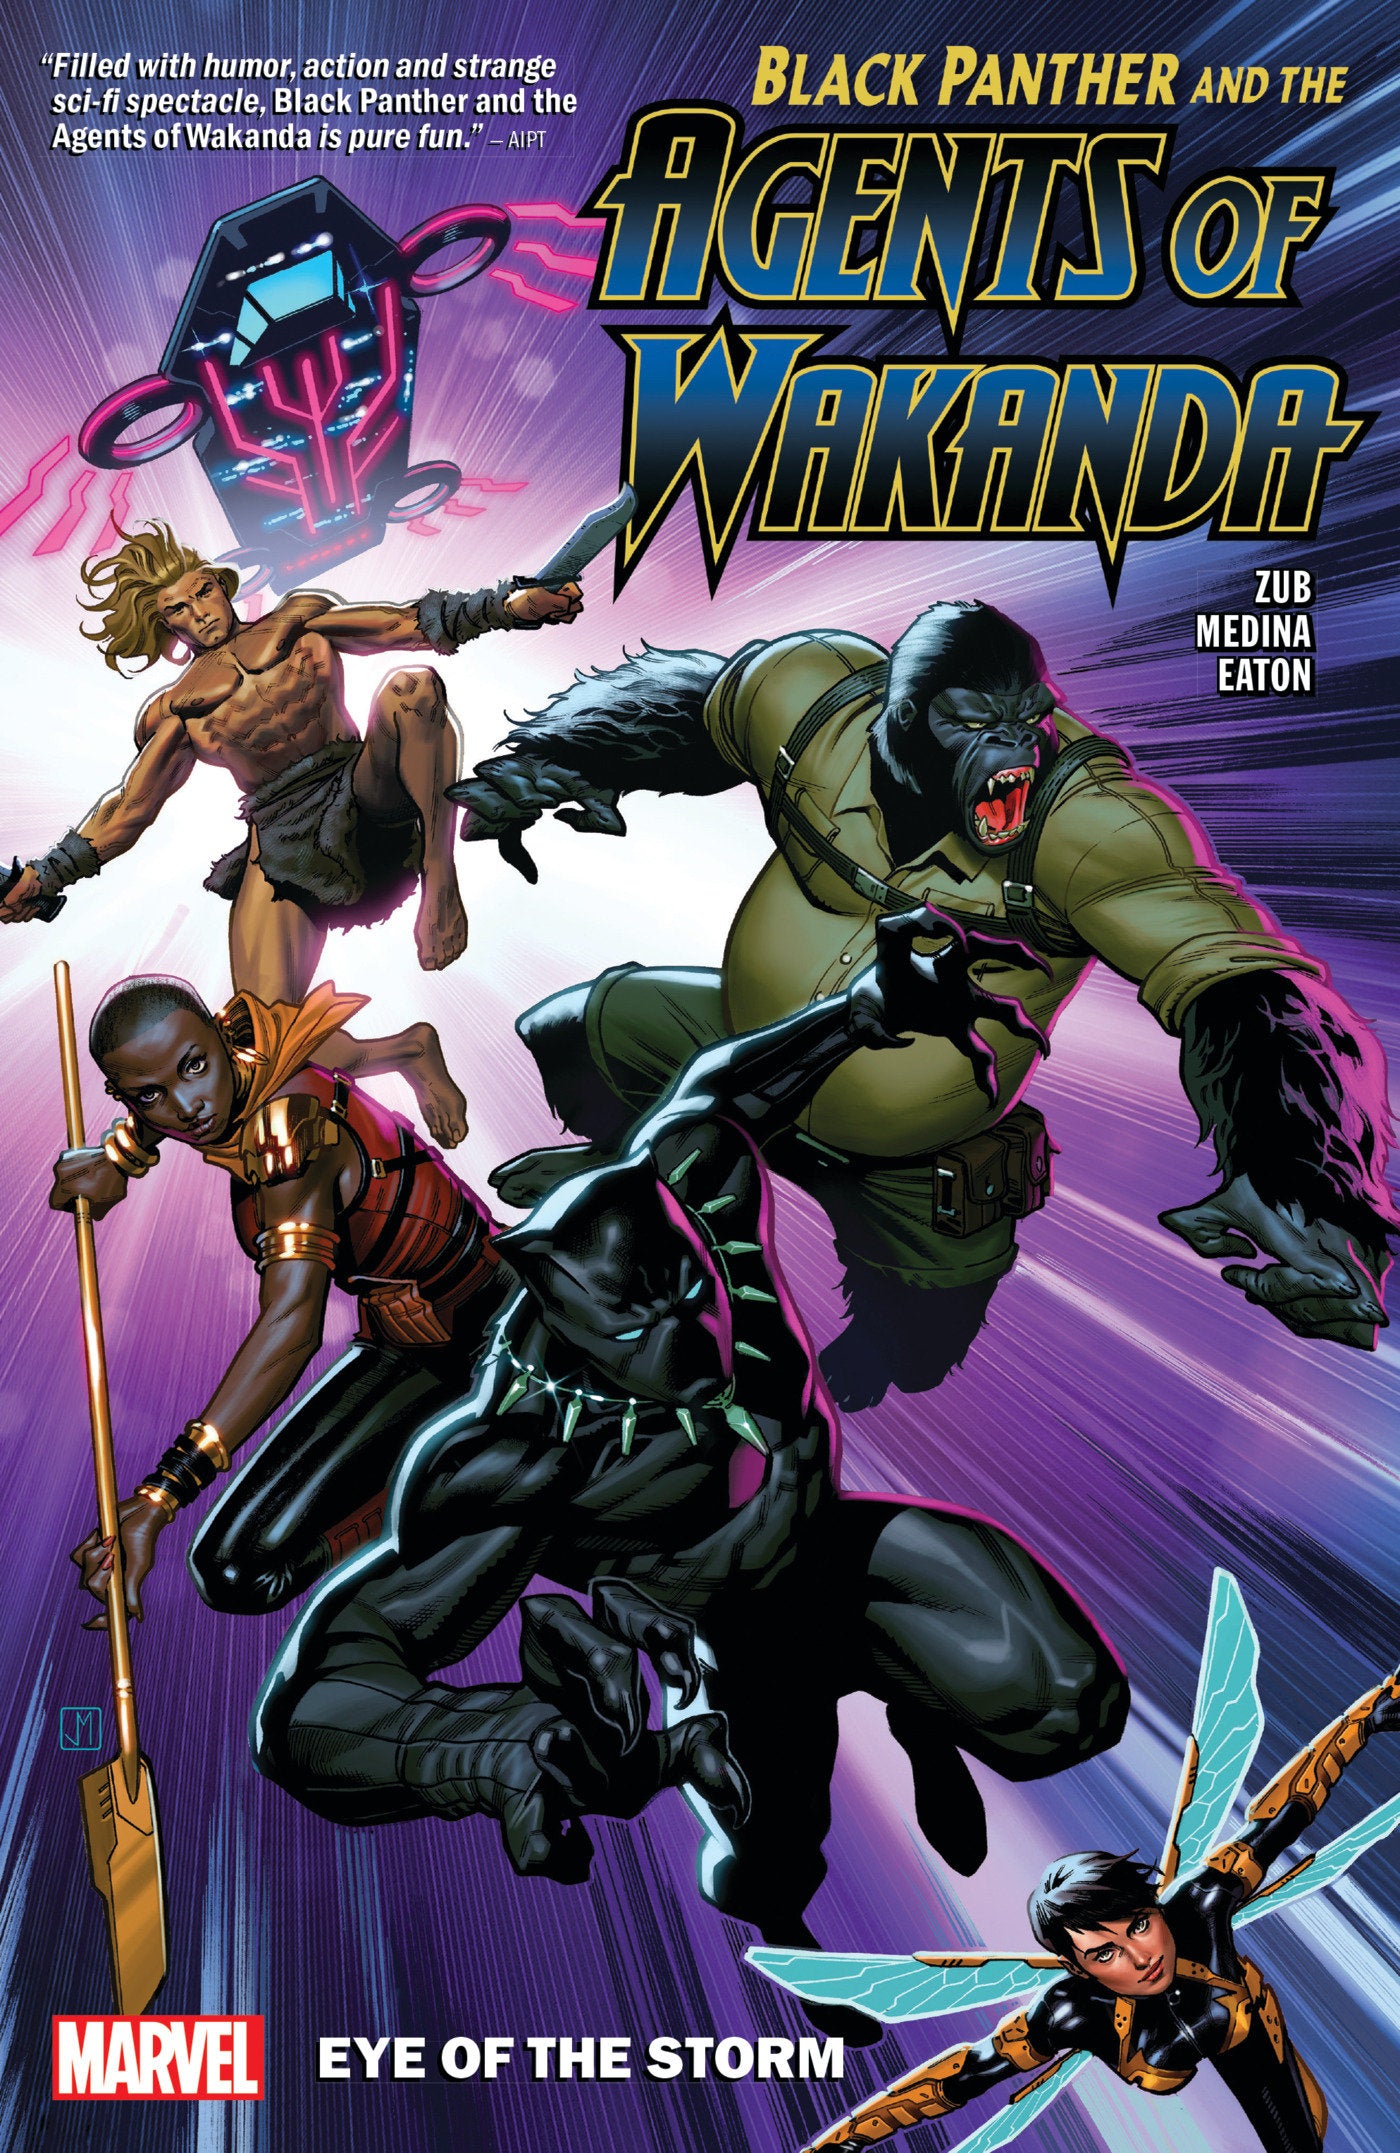 BLACK PANTHER AND THE AGENTS OF WAKANDA VOL. 1: EYE OF THE STORM TRADE PAPERBACK